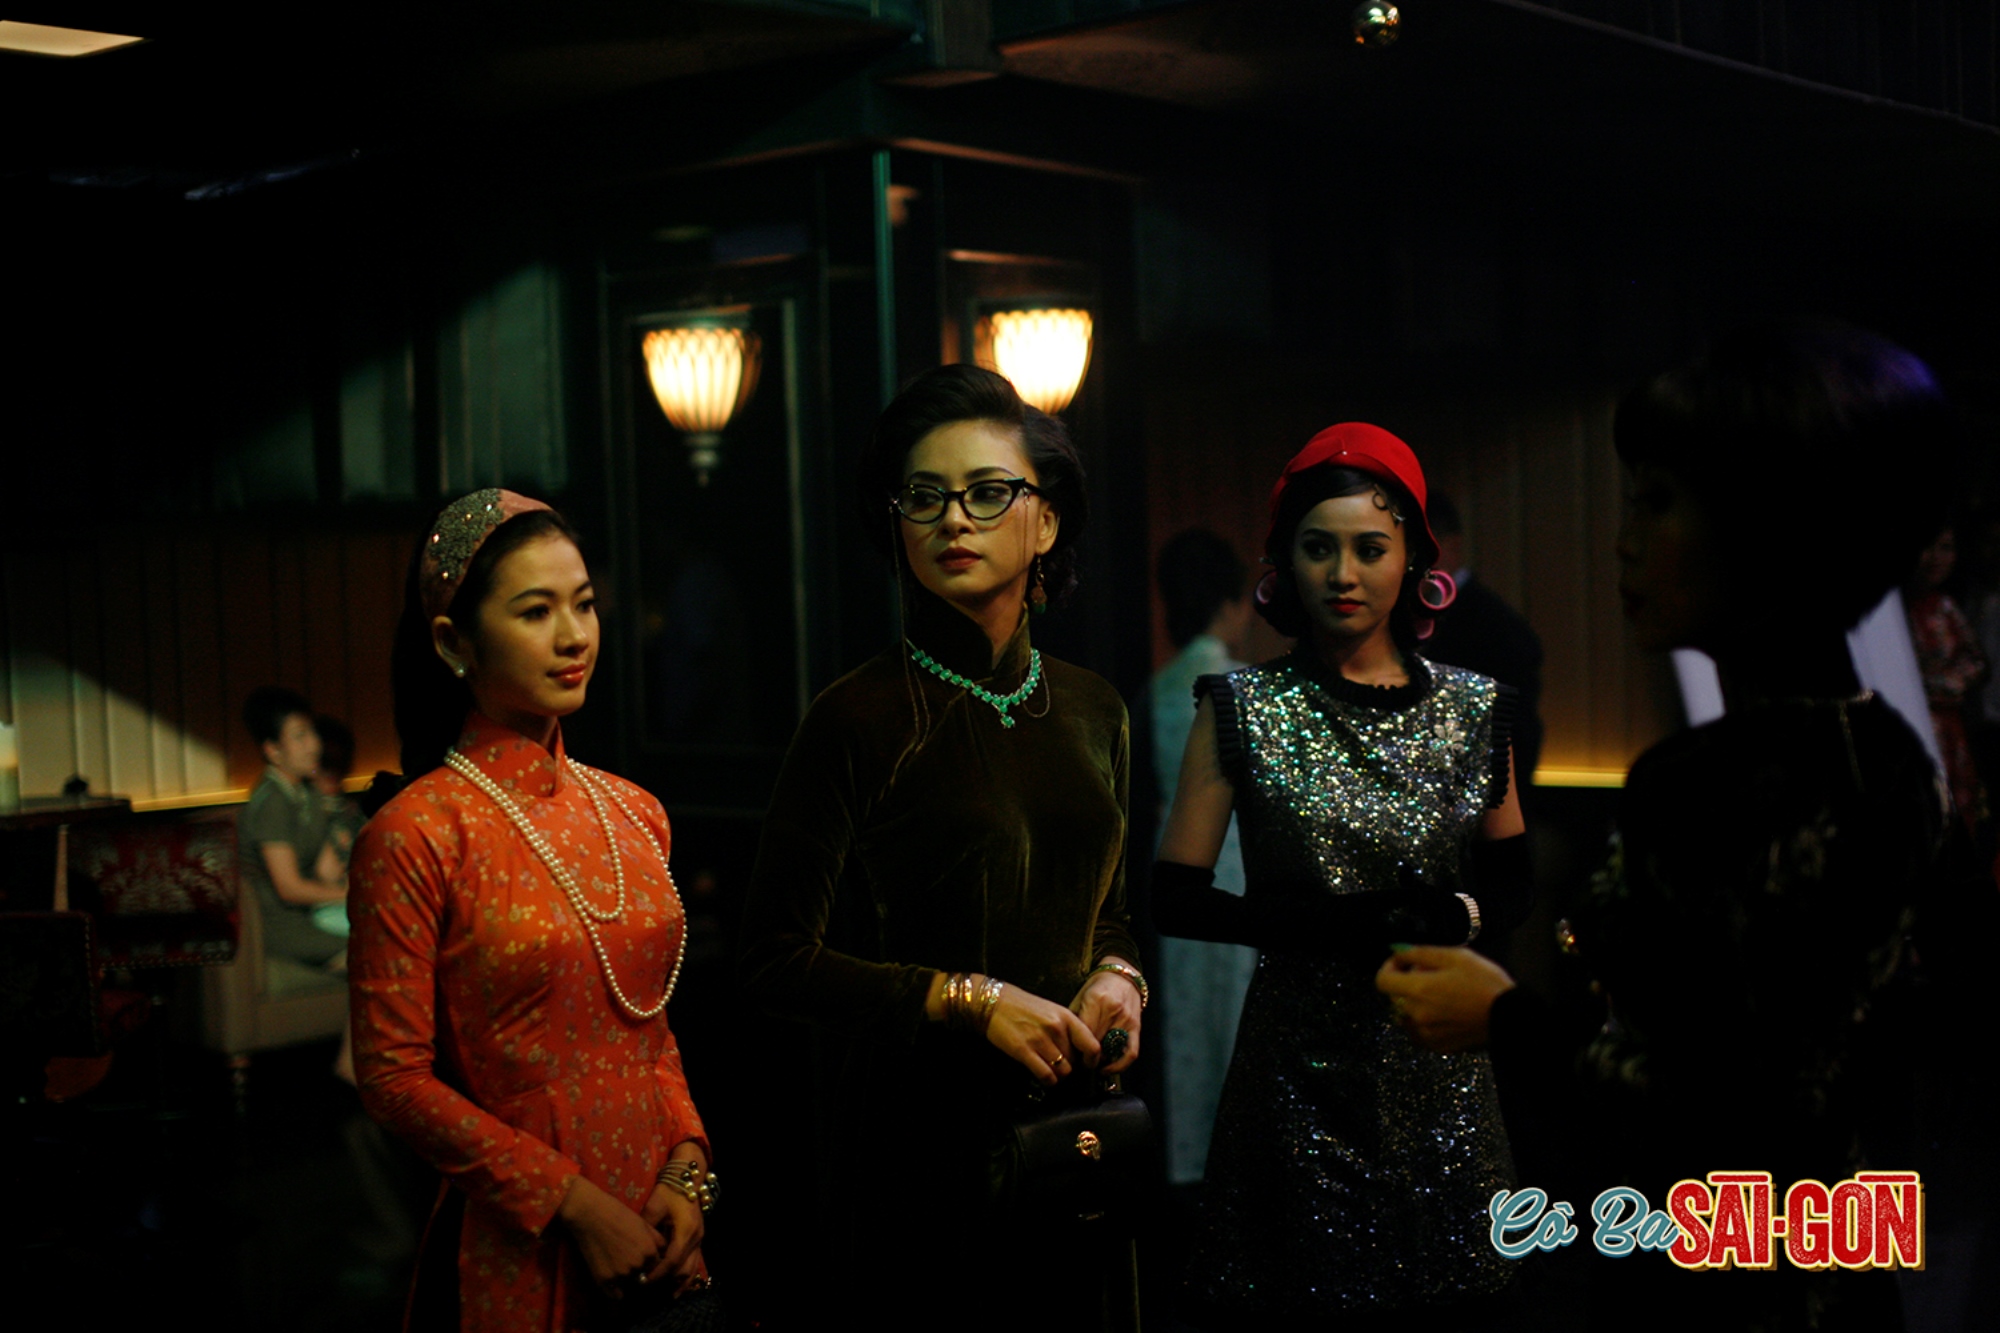 Ngo Thanh Van stars in “Co Ba Sai Gon” (The Tailor).